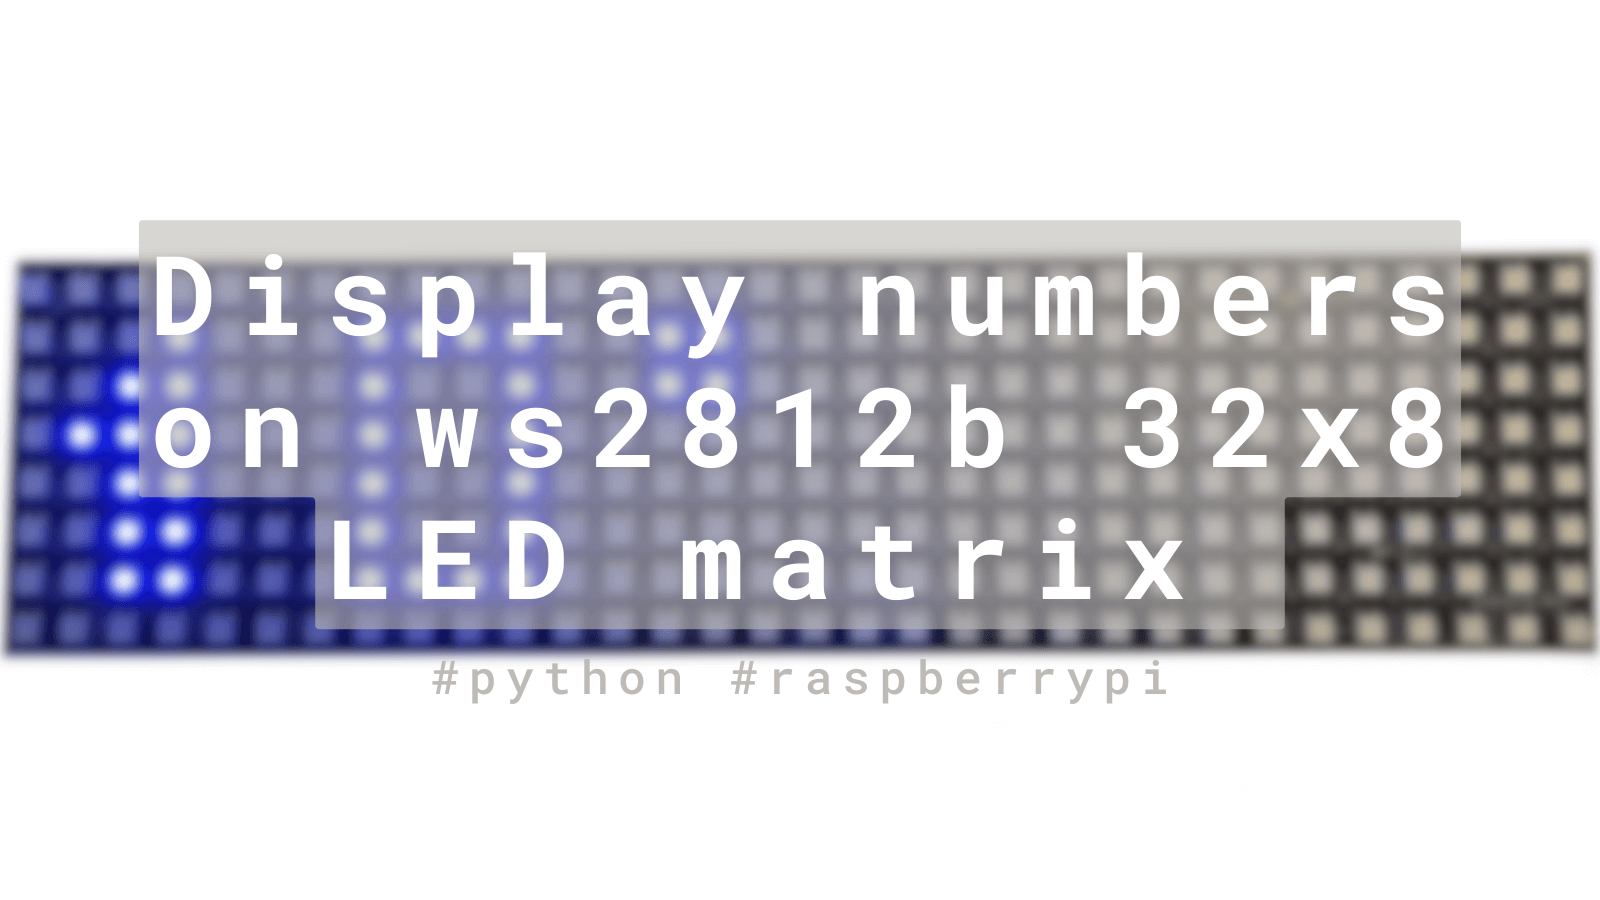 Display number and glyph on LED matrix